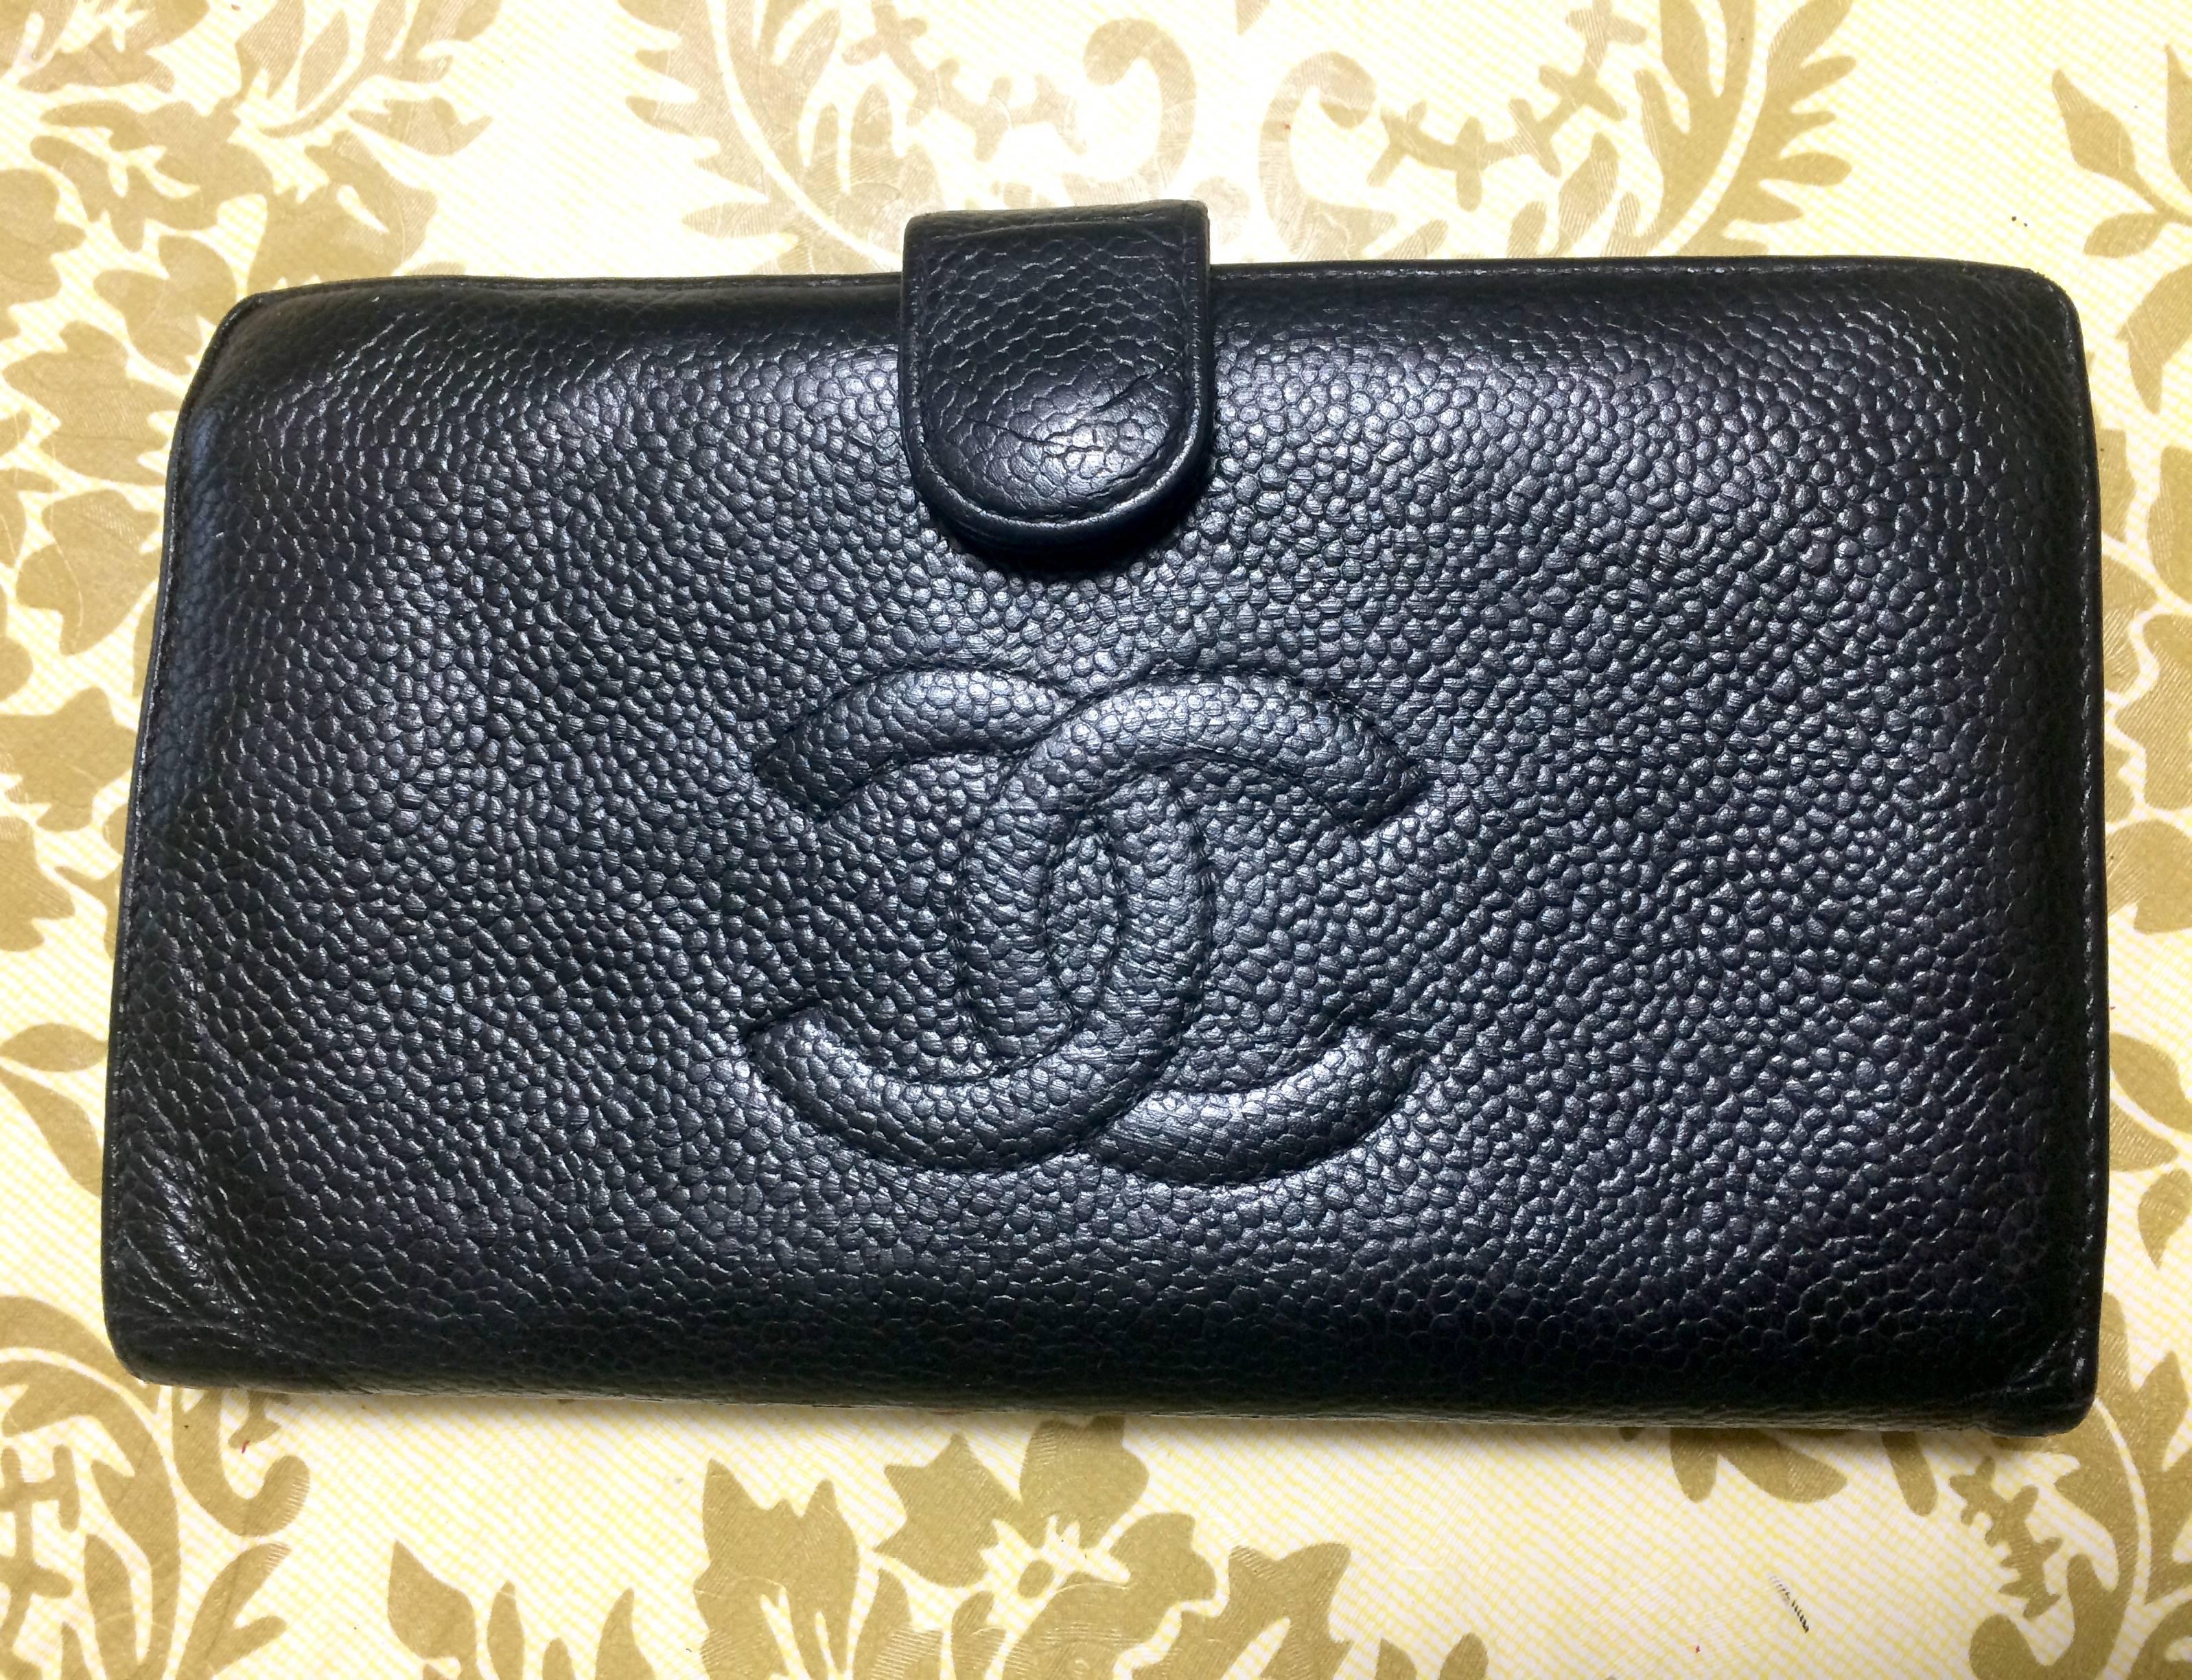 Vintage CHANEL black caviar leather wallet with large CC stitch mark logo. Classic wallet.

This is a CHANEL vintage wallet in classic black caviar leather. 
Modest, simple and elegant.
It is something that would never go out of style.
The CC